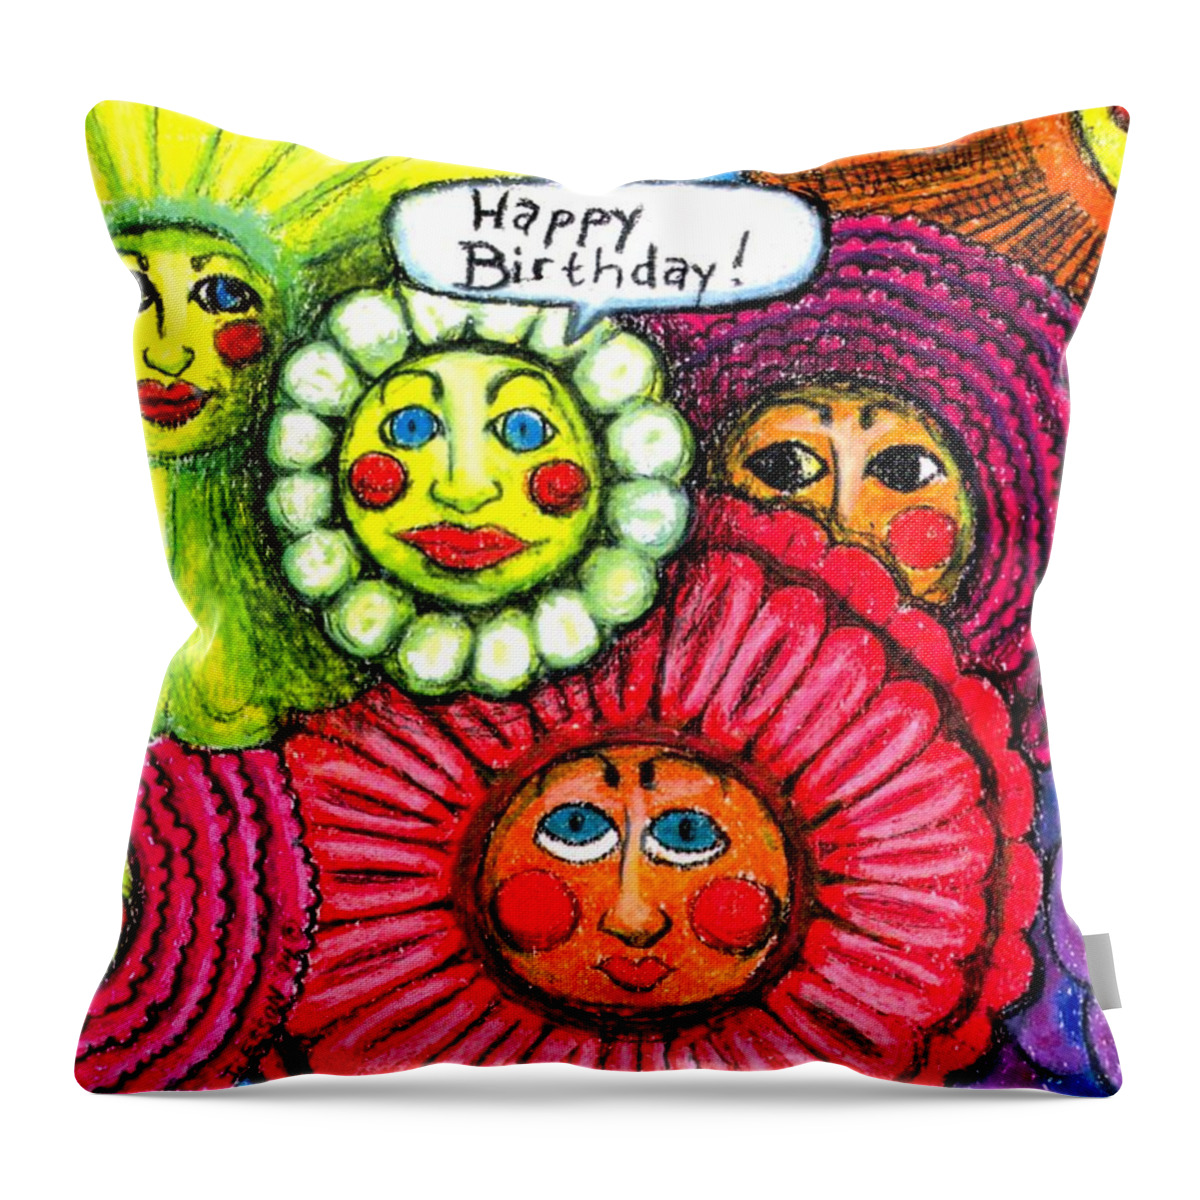 Flowers Throw Pillow featuring the painting Birthday Flowers by Genevieve Esson